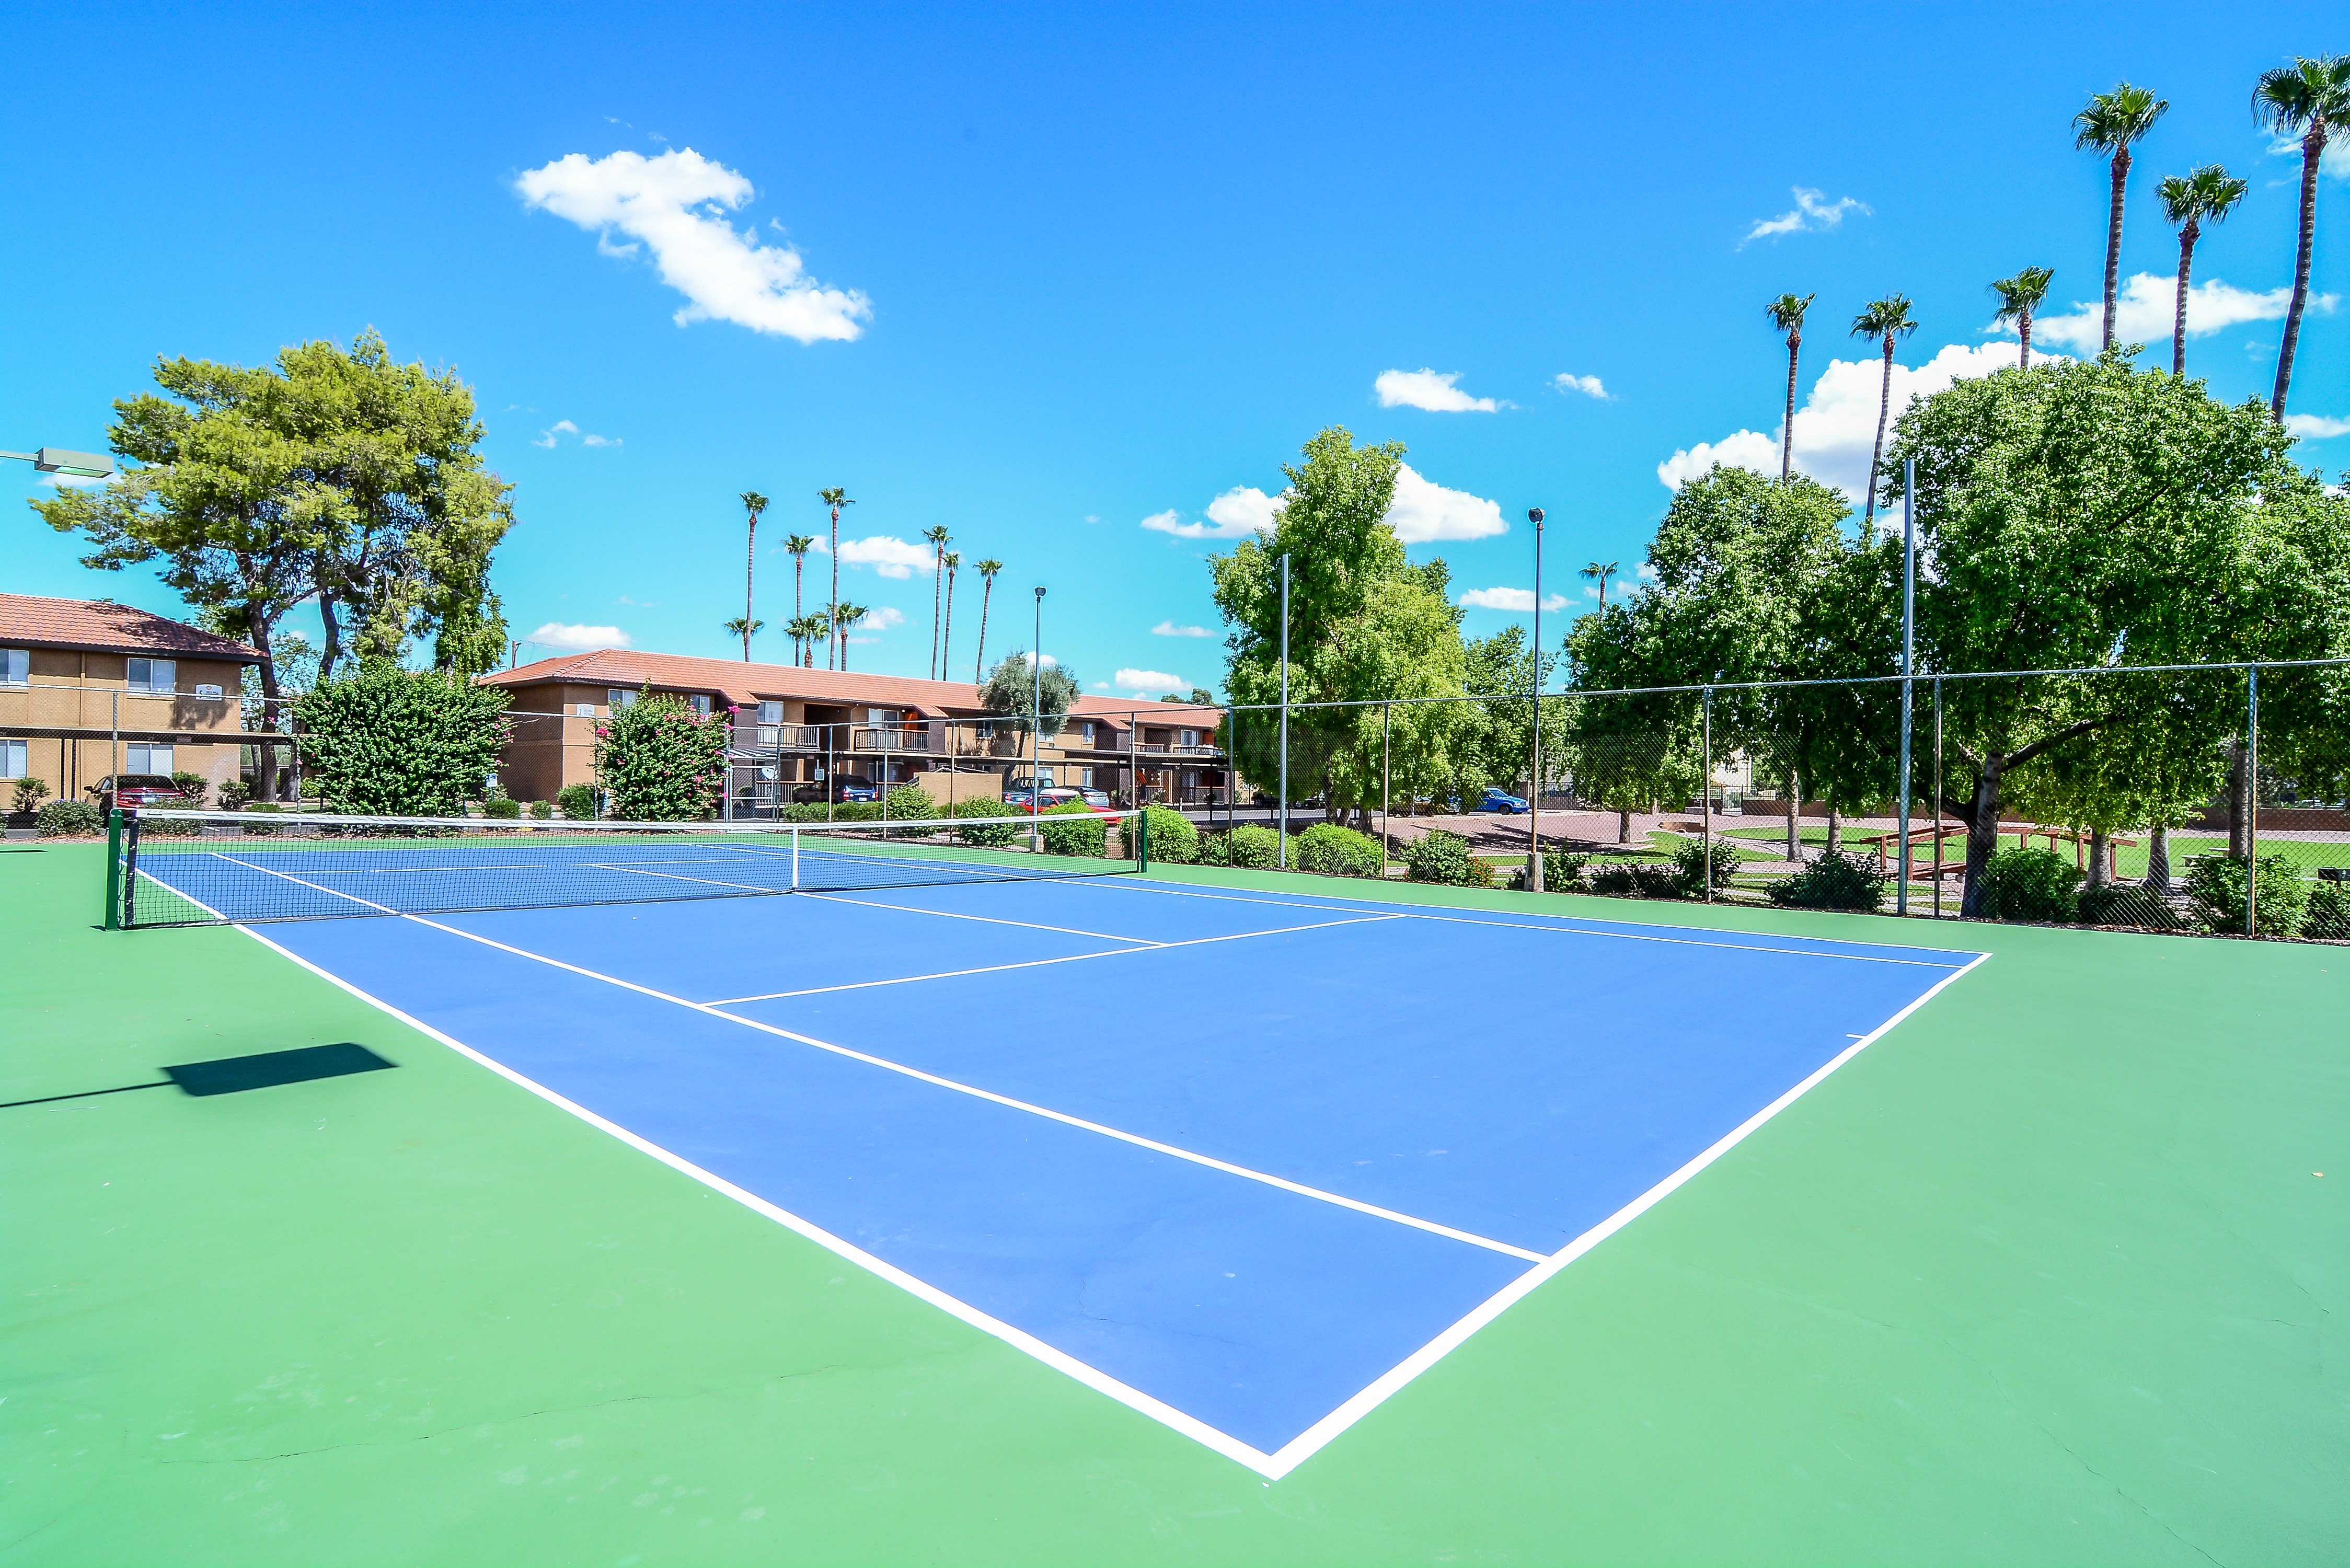 Tennis court at 505 West Apartment Homes in Tempe, Arizona